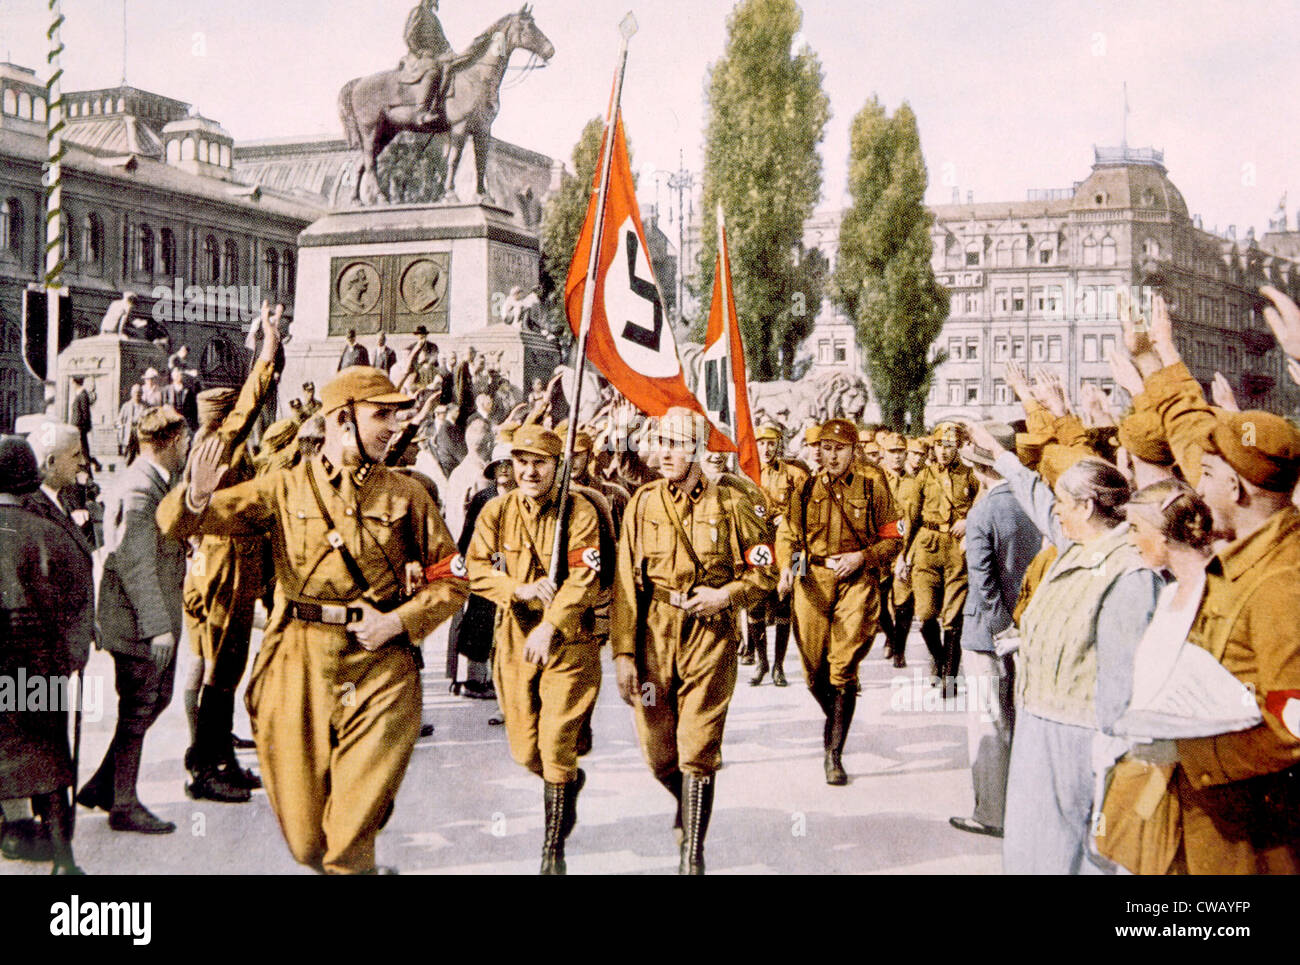 Nazi Germany, German Nazi activist Horst Wessel marching at the head of his storm troopers in Nuremberg, 1929. Stock Photo